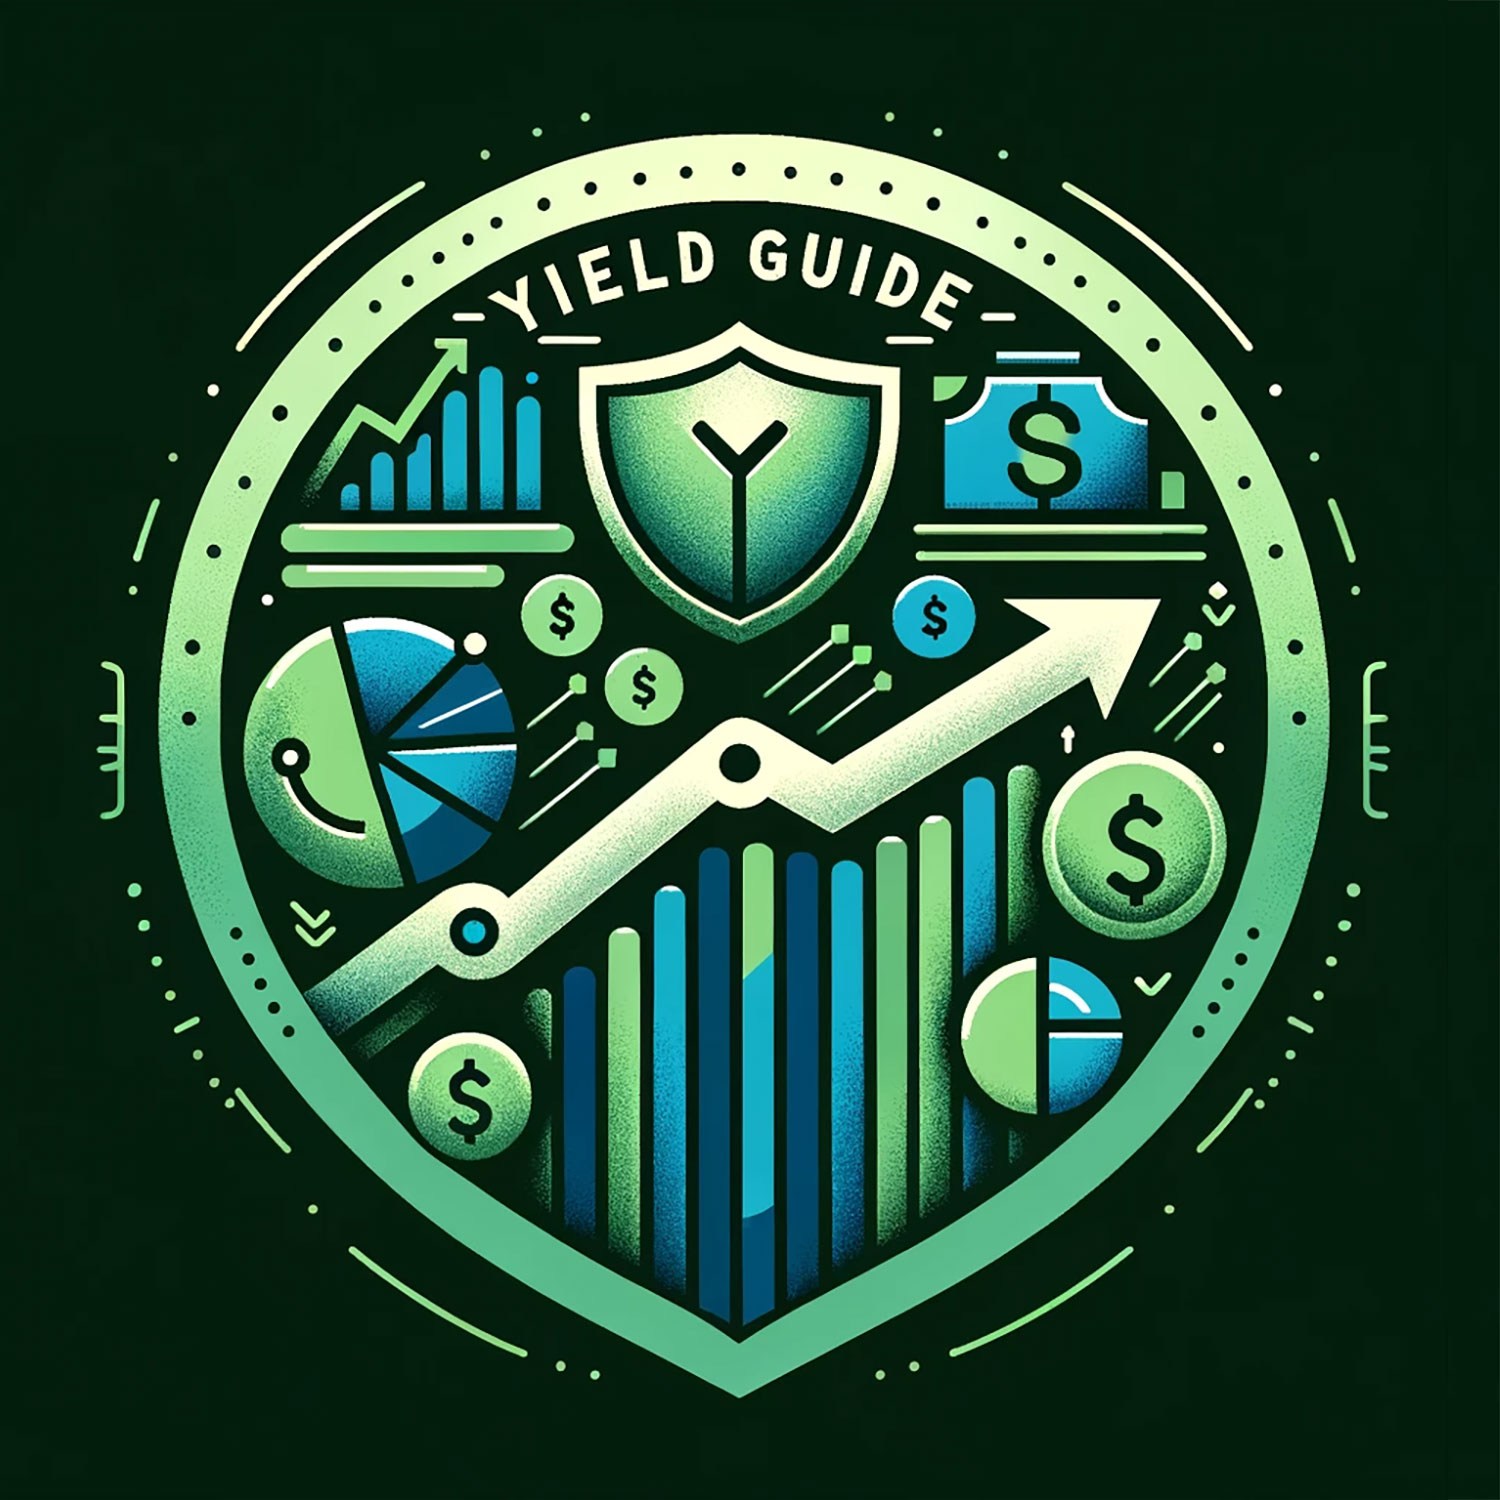 Show artwork for Yield Guide